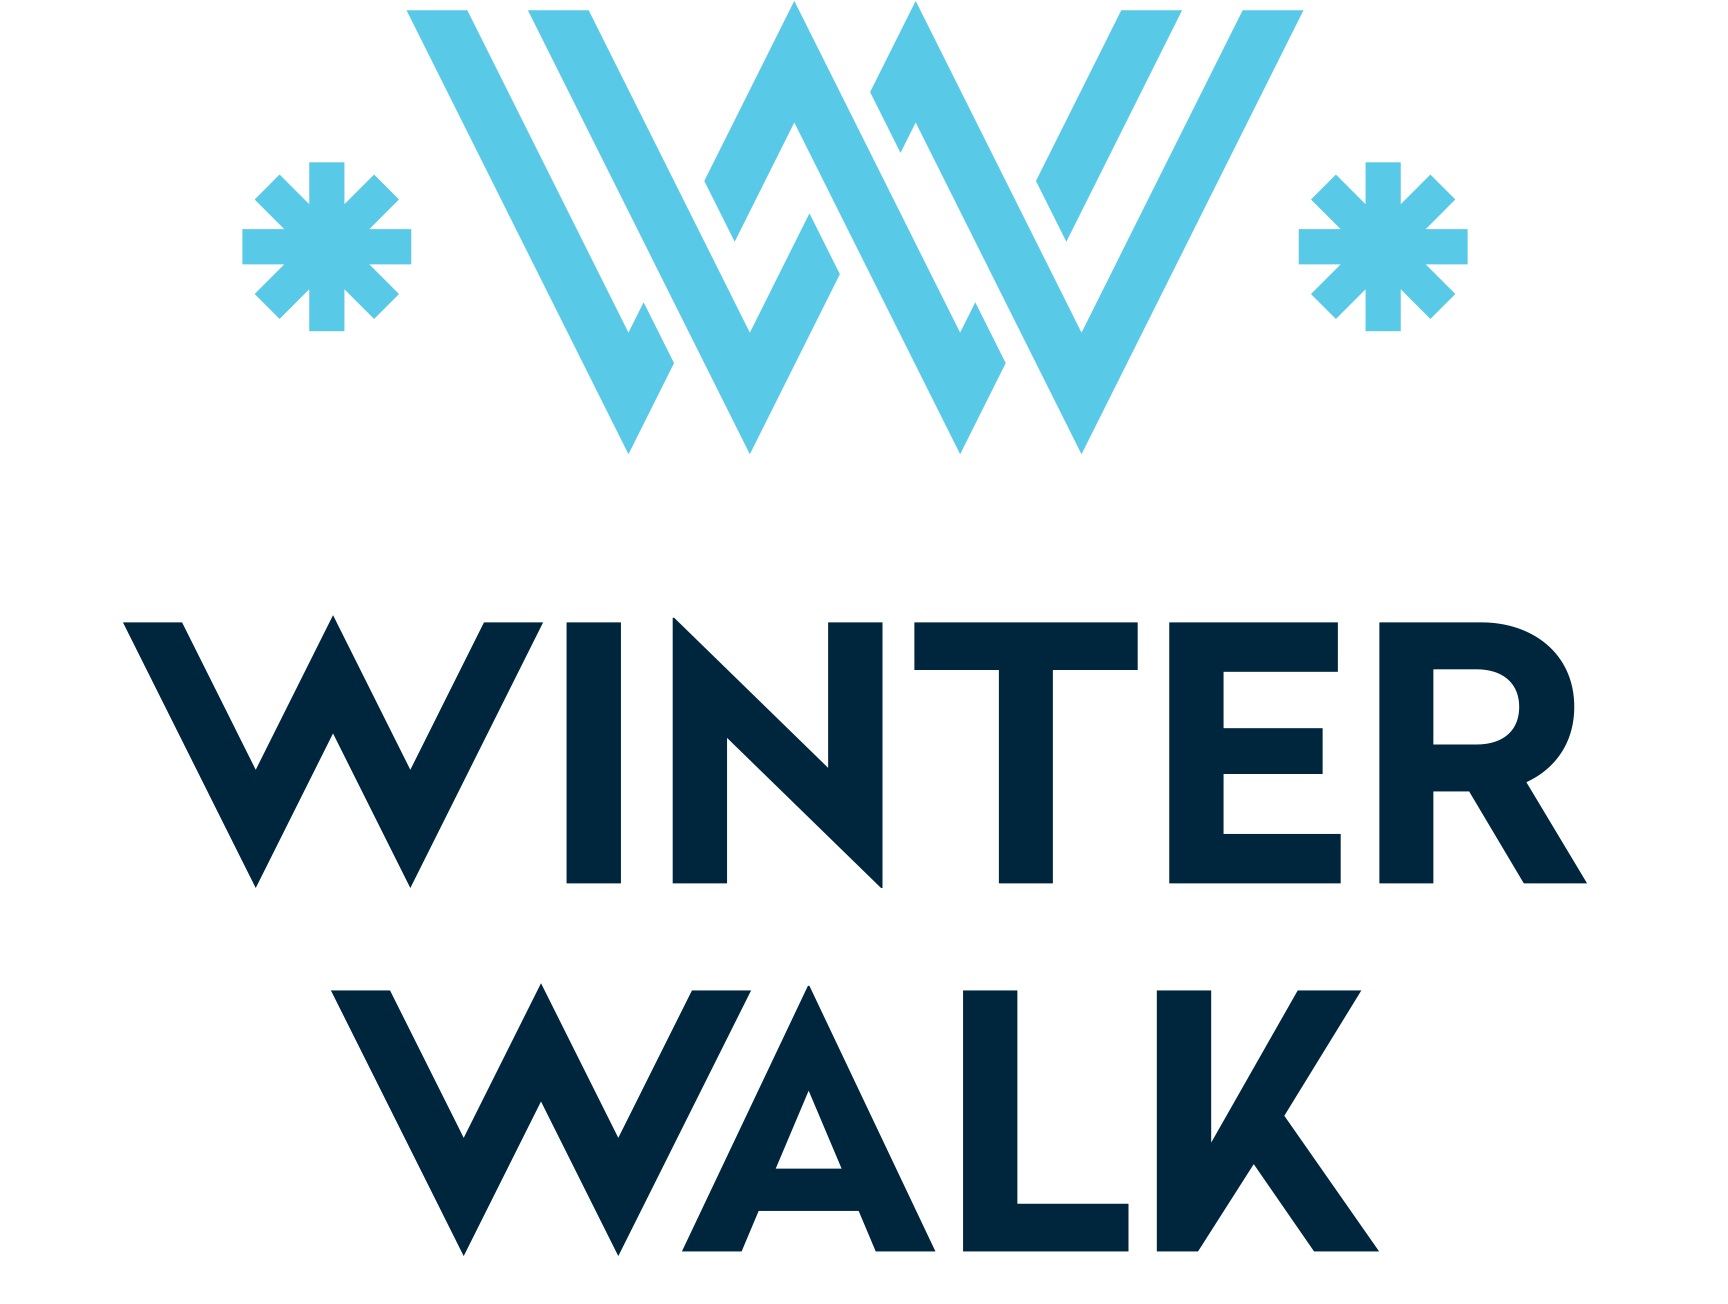 14-astounding-facts-about-winter-walk